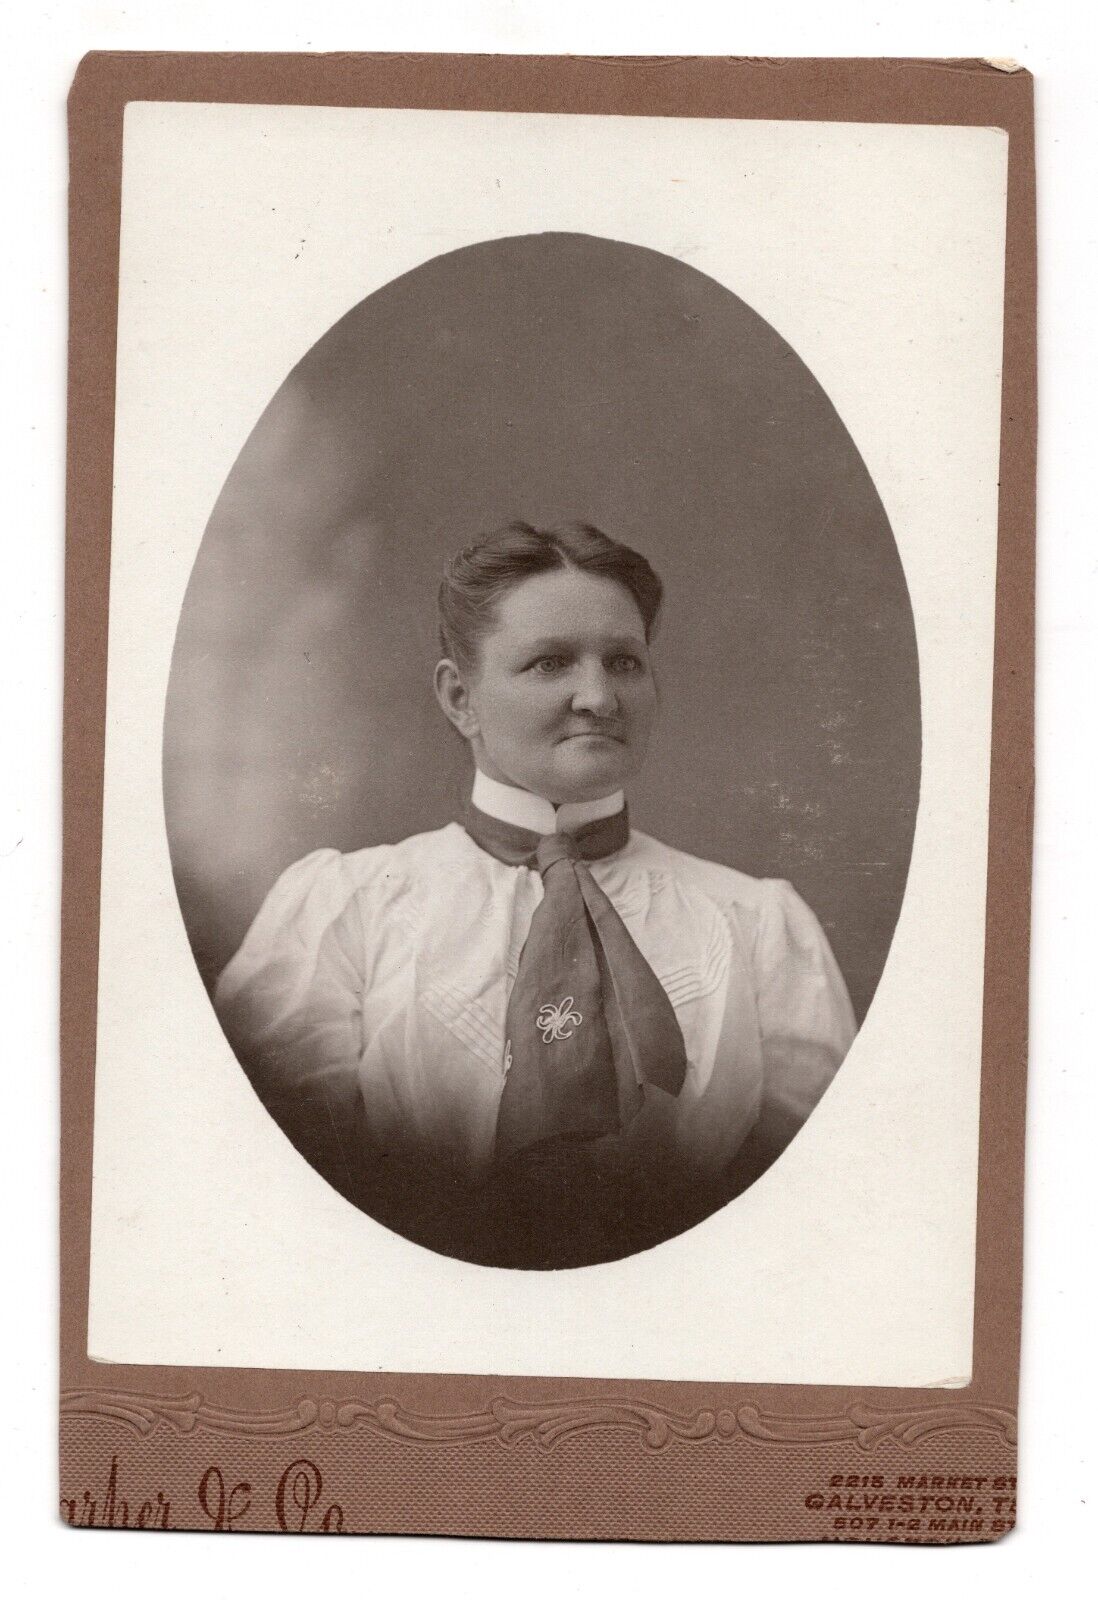 CIRCA 1890s CABINET CARD BARBER & CO. OLDER LADY IN WHITE DRESS GALVESTON TEXAS